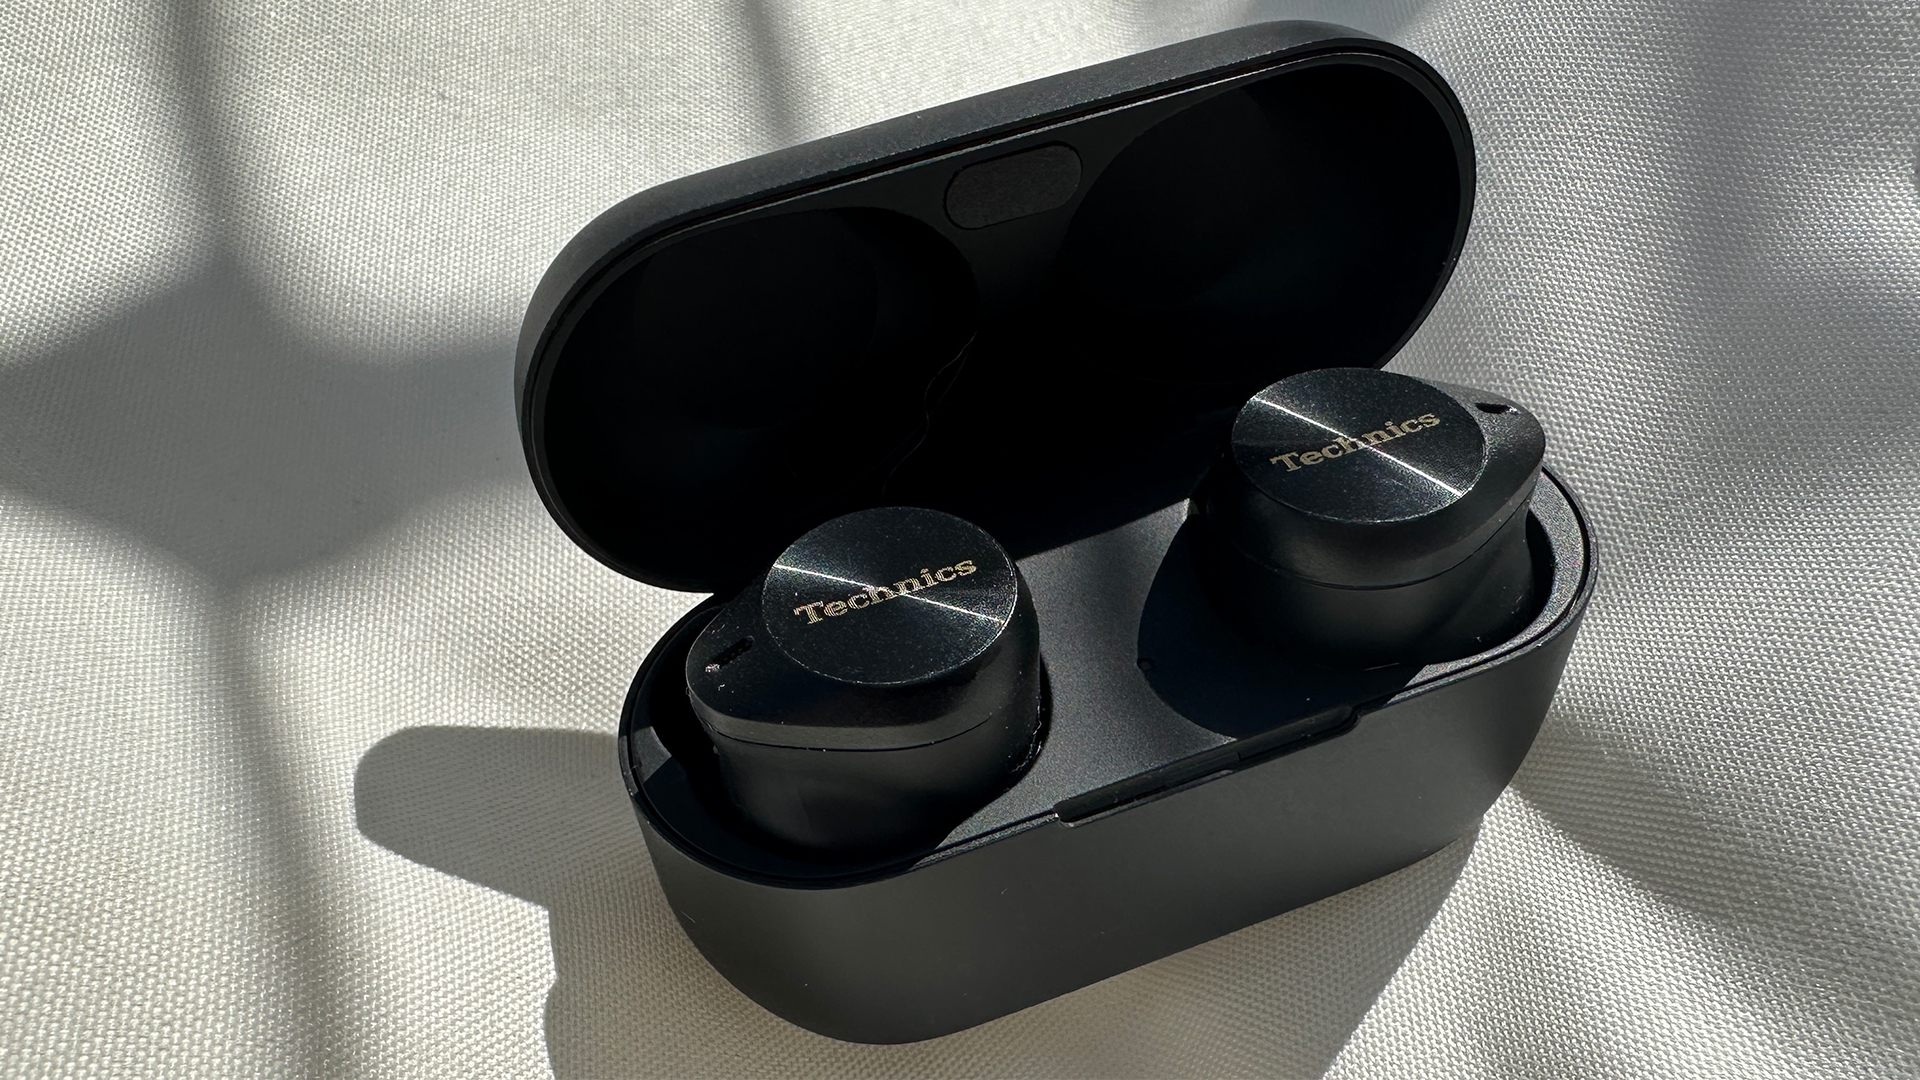 Technics EAH-AZ80 review: feature-packed wireless earbuds with